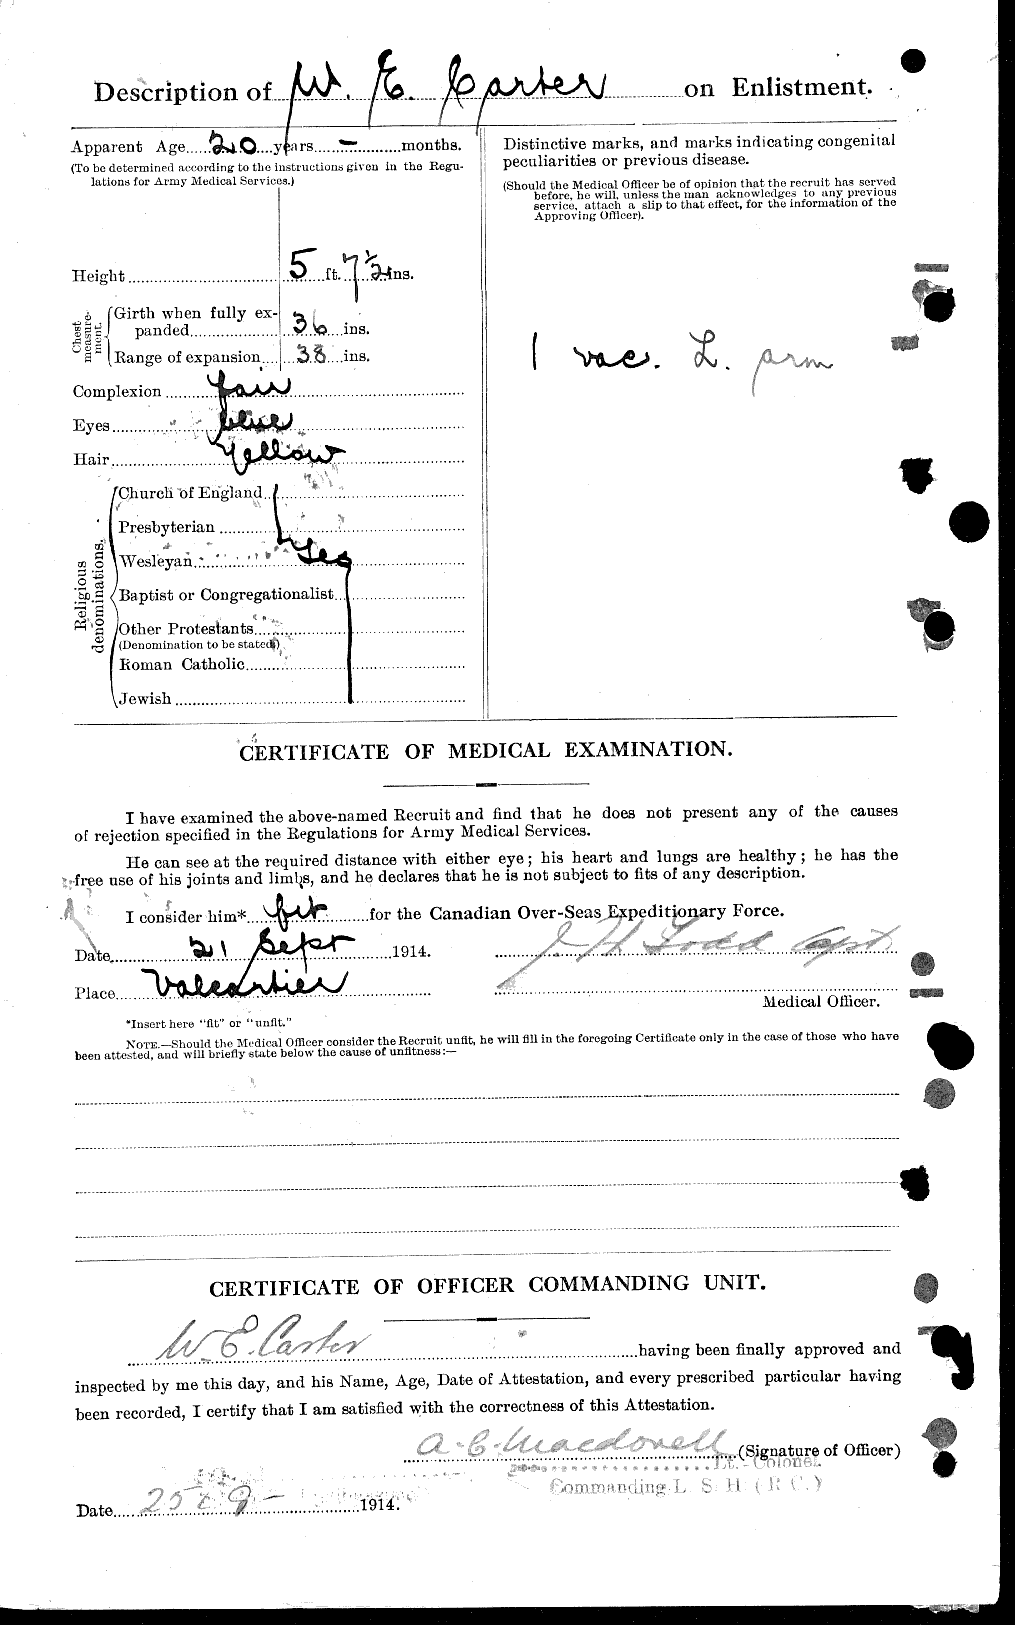 Personnel Records of the First World War - CEF 012471b